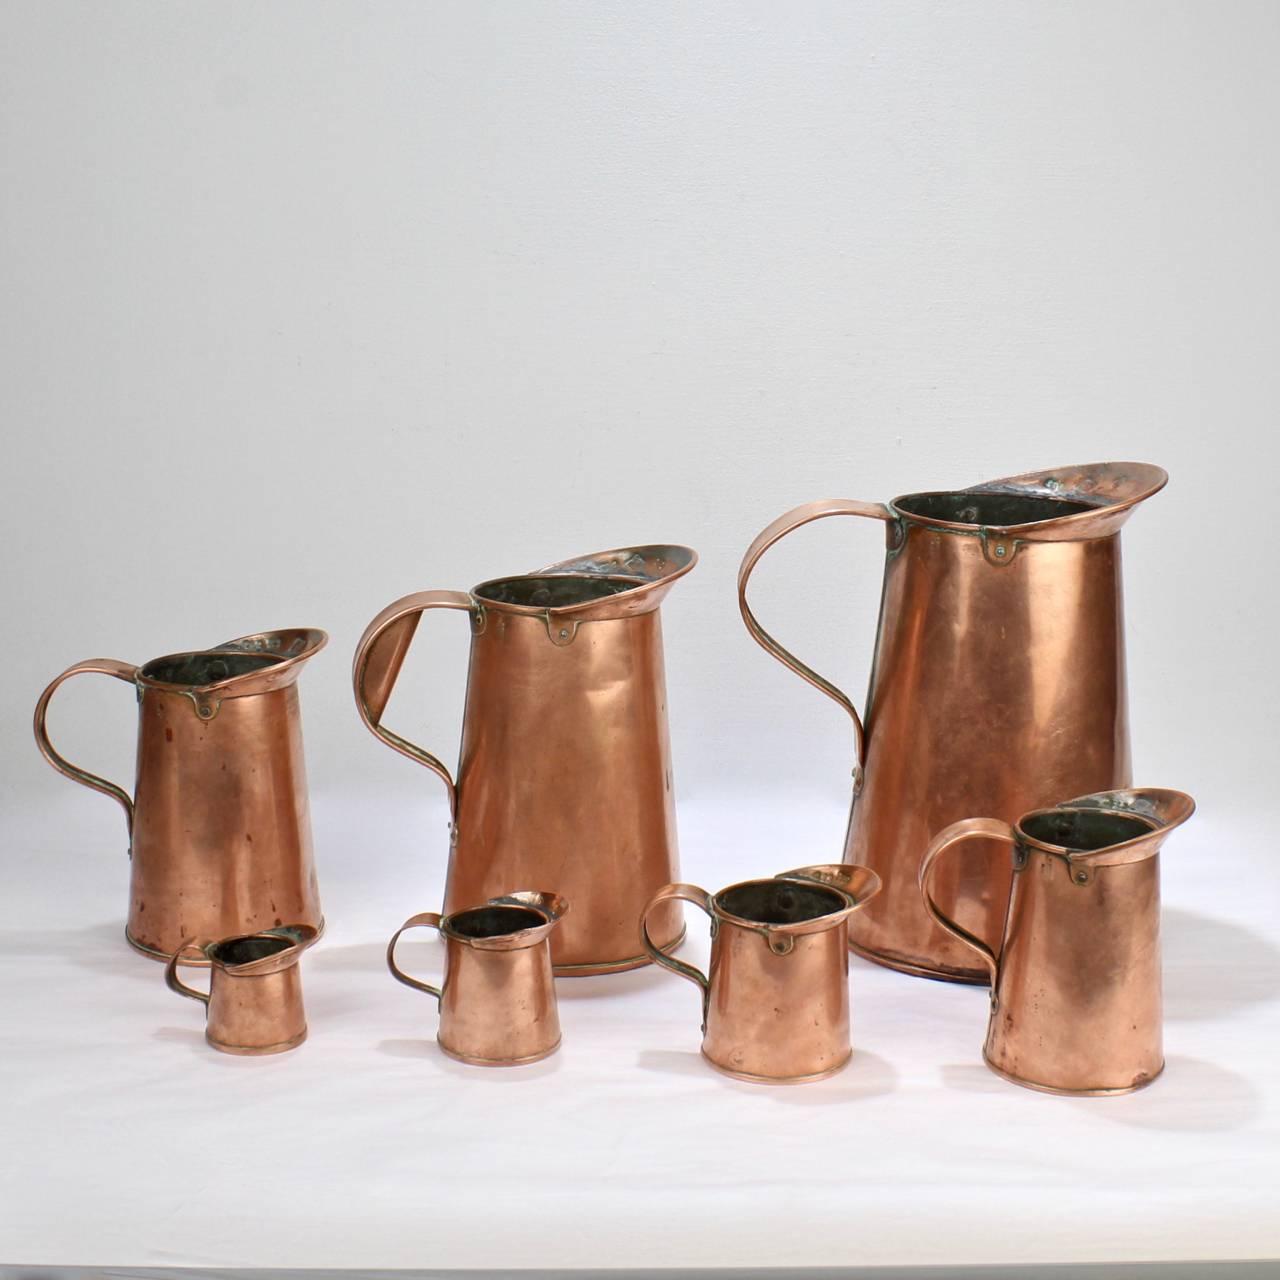 A wonderful set of 19th century New York City antique copper measures.

Comprised of seven pitcher form, tin lined measures in descending sizes. Stamped with various numbers and letters.

Marked for and sold by B. Budde of 50 Vesey St New York,